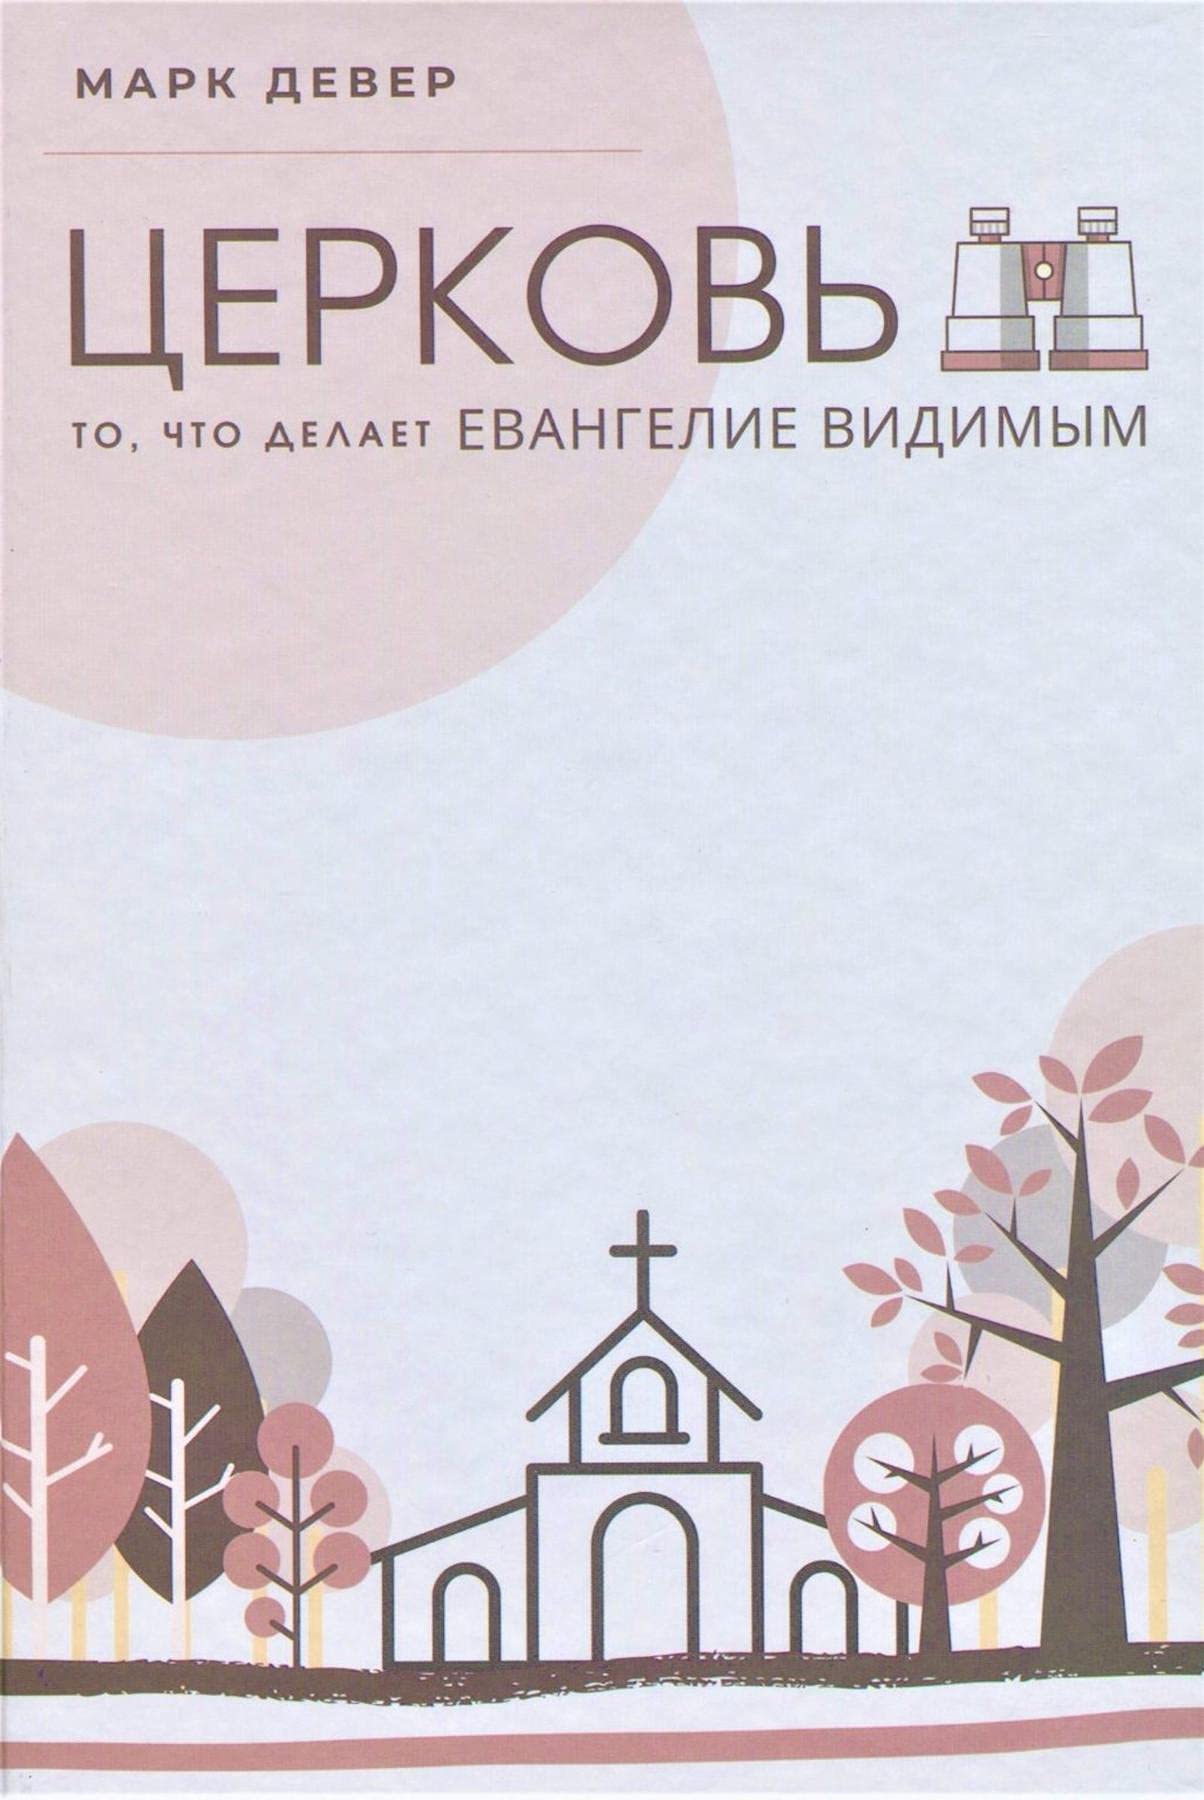 ЦЕРКОВЬ (The Church) (Russian): The Gospel Made Visible (Building Healthy Churches (Russian)) (Russian Edition)